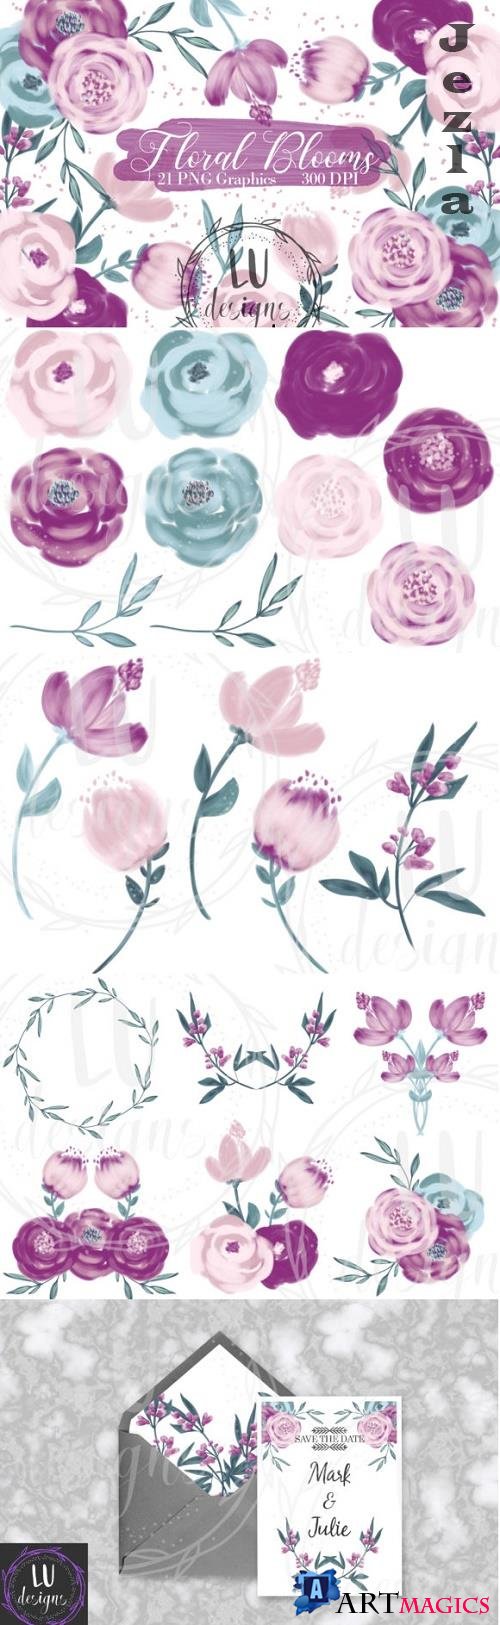 Flowers Clipart, Burgundy Floral Graphic